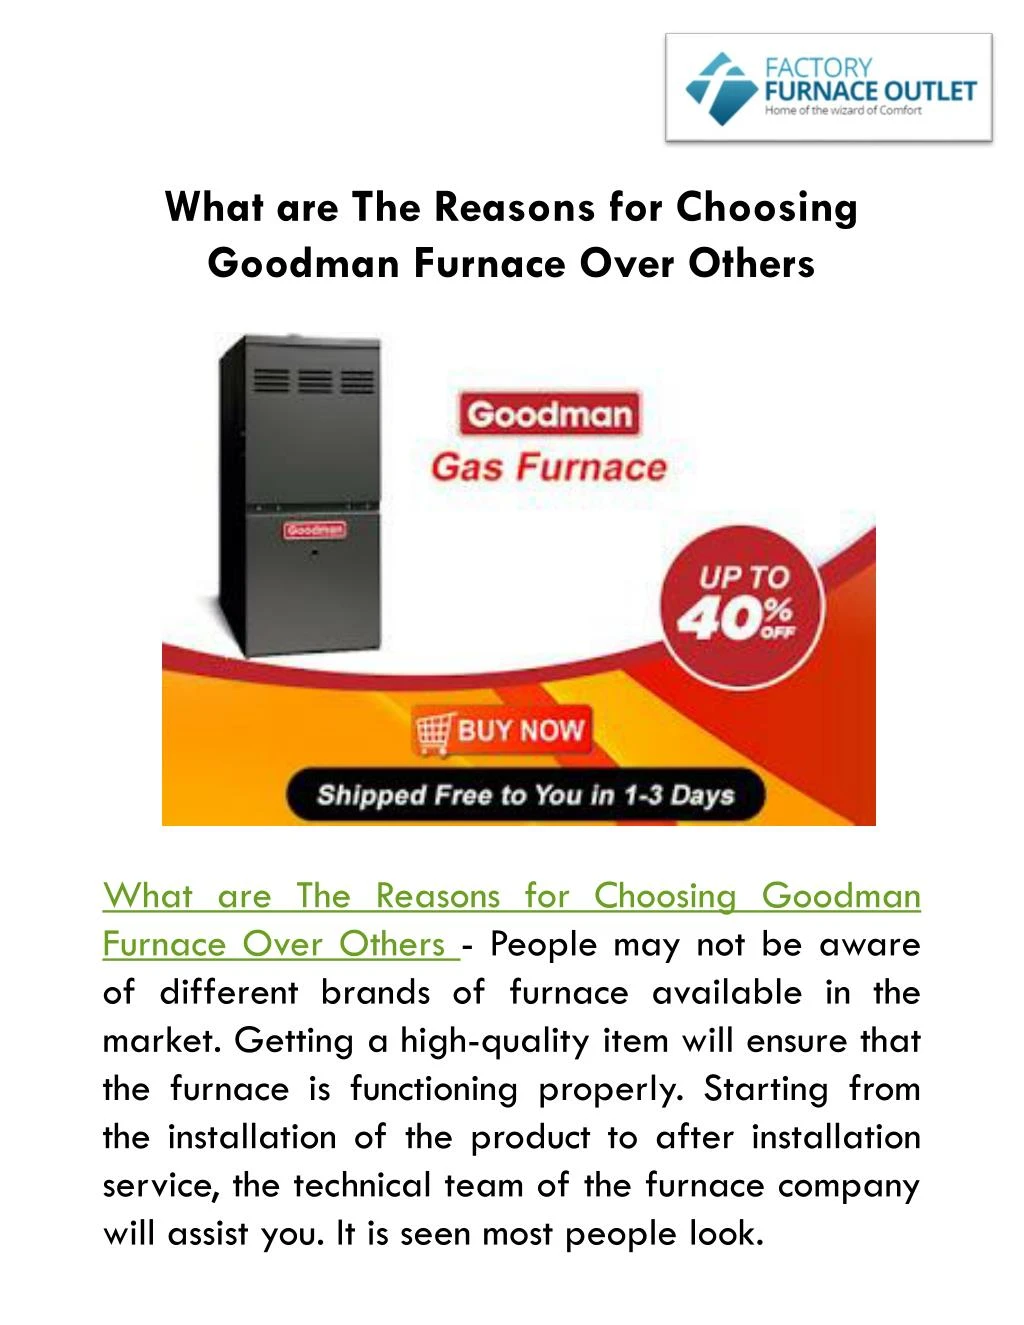 what are the reasons for choosing goodman furnace